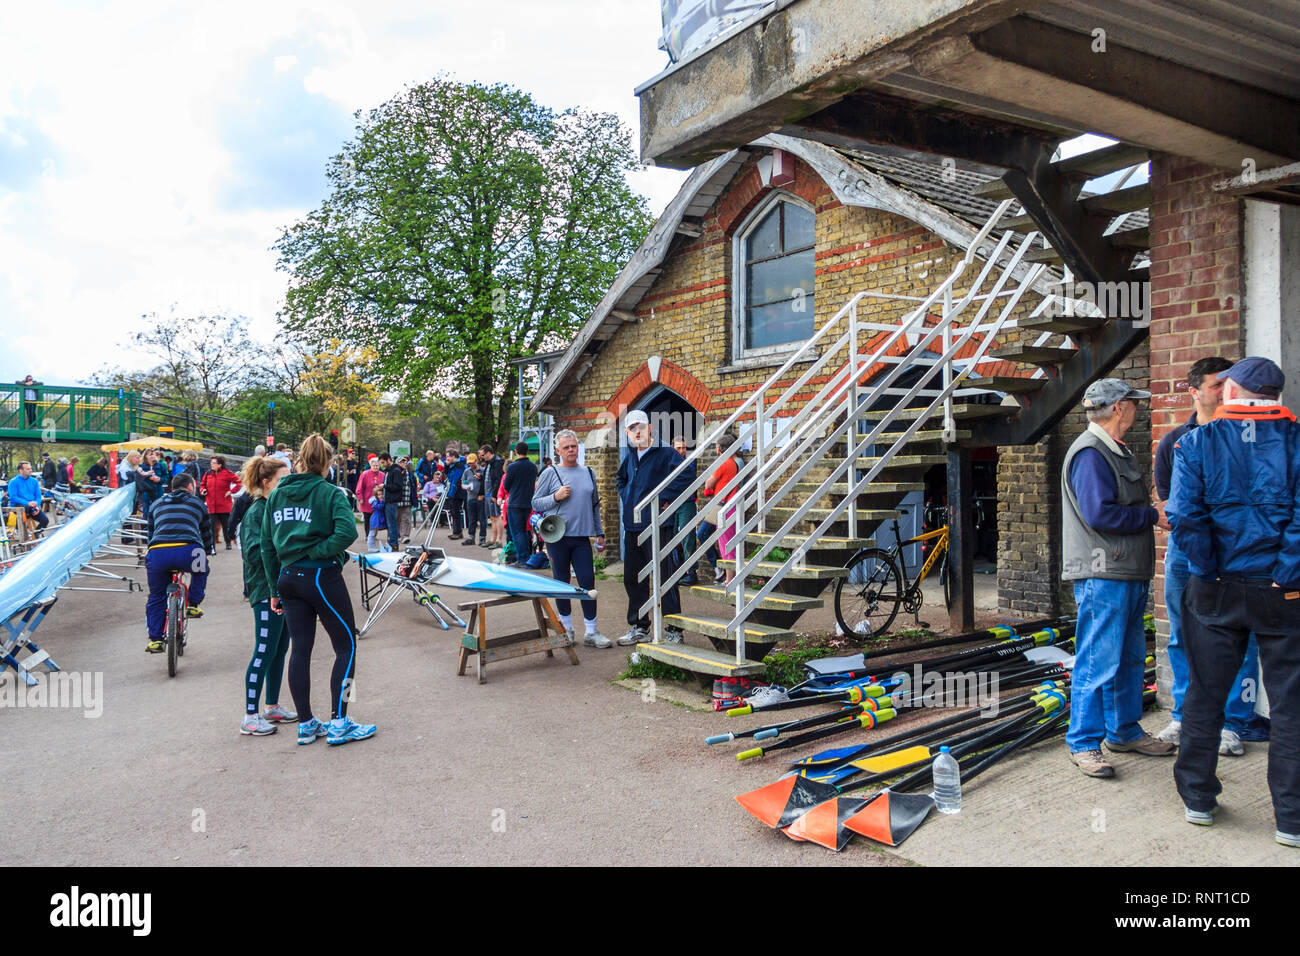 A sporting event at Lea Rowing Club on the River Lea, Upper Clapton, London, UK Stock Photo